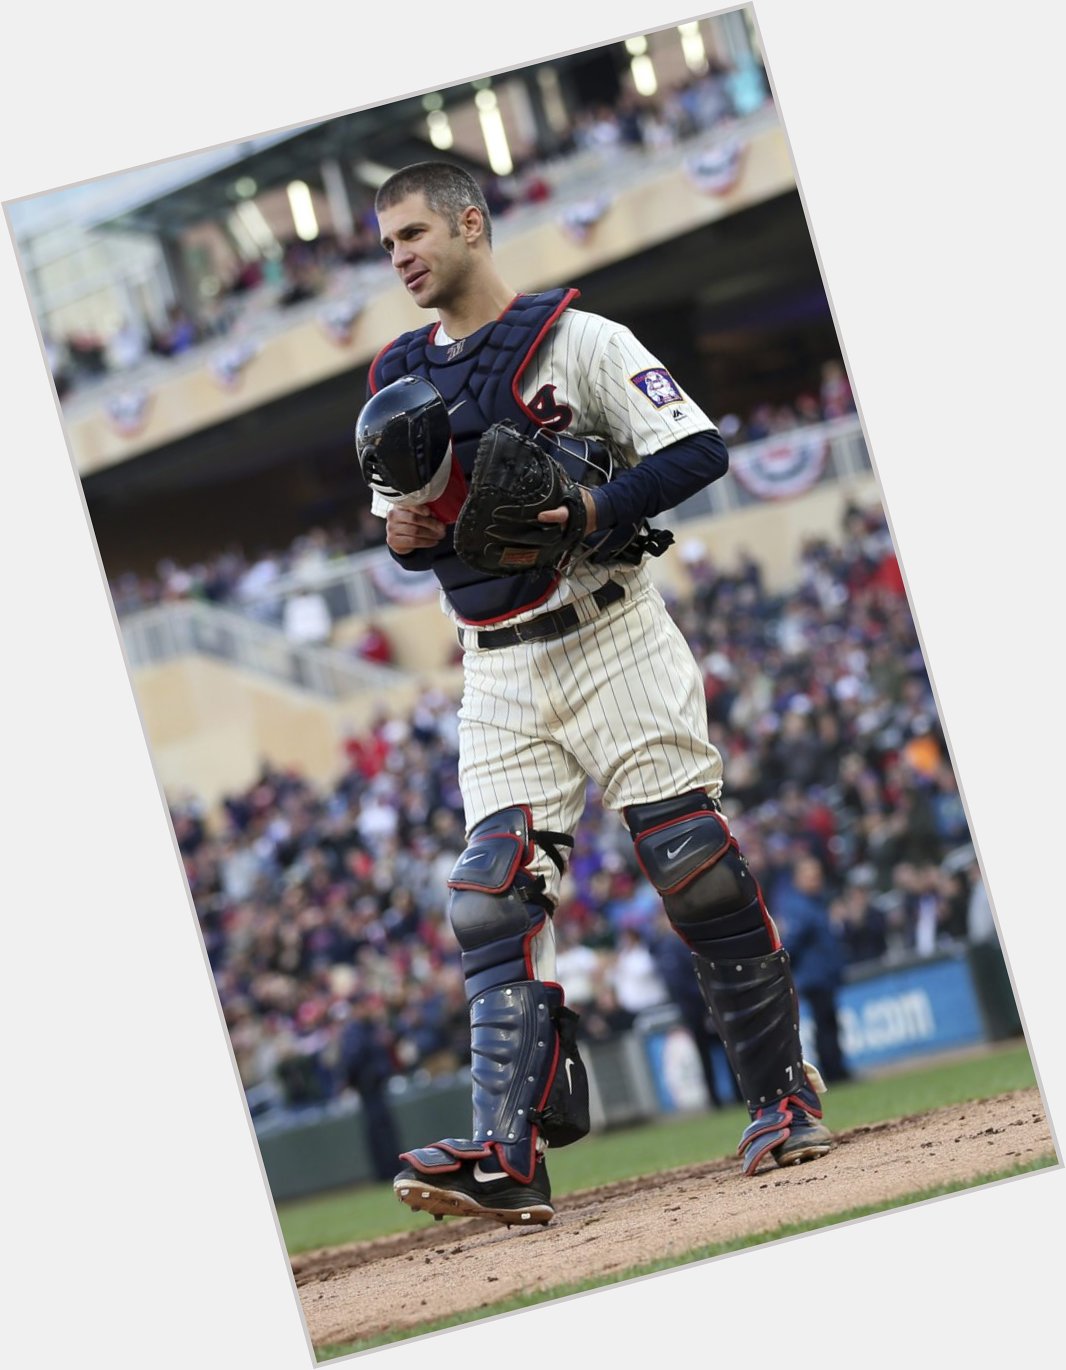 Growing up playing catcher Joe Mauer was my idol. 
Happy birthday stud, at age 36 I bet you\d still be killing it. 